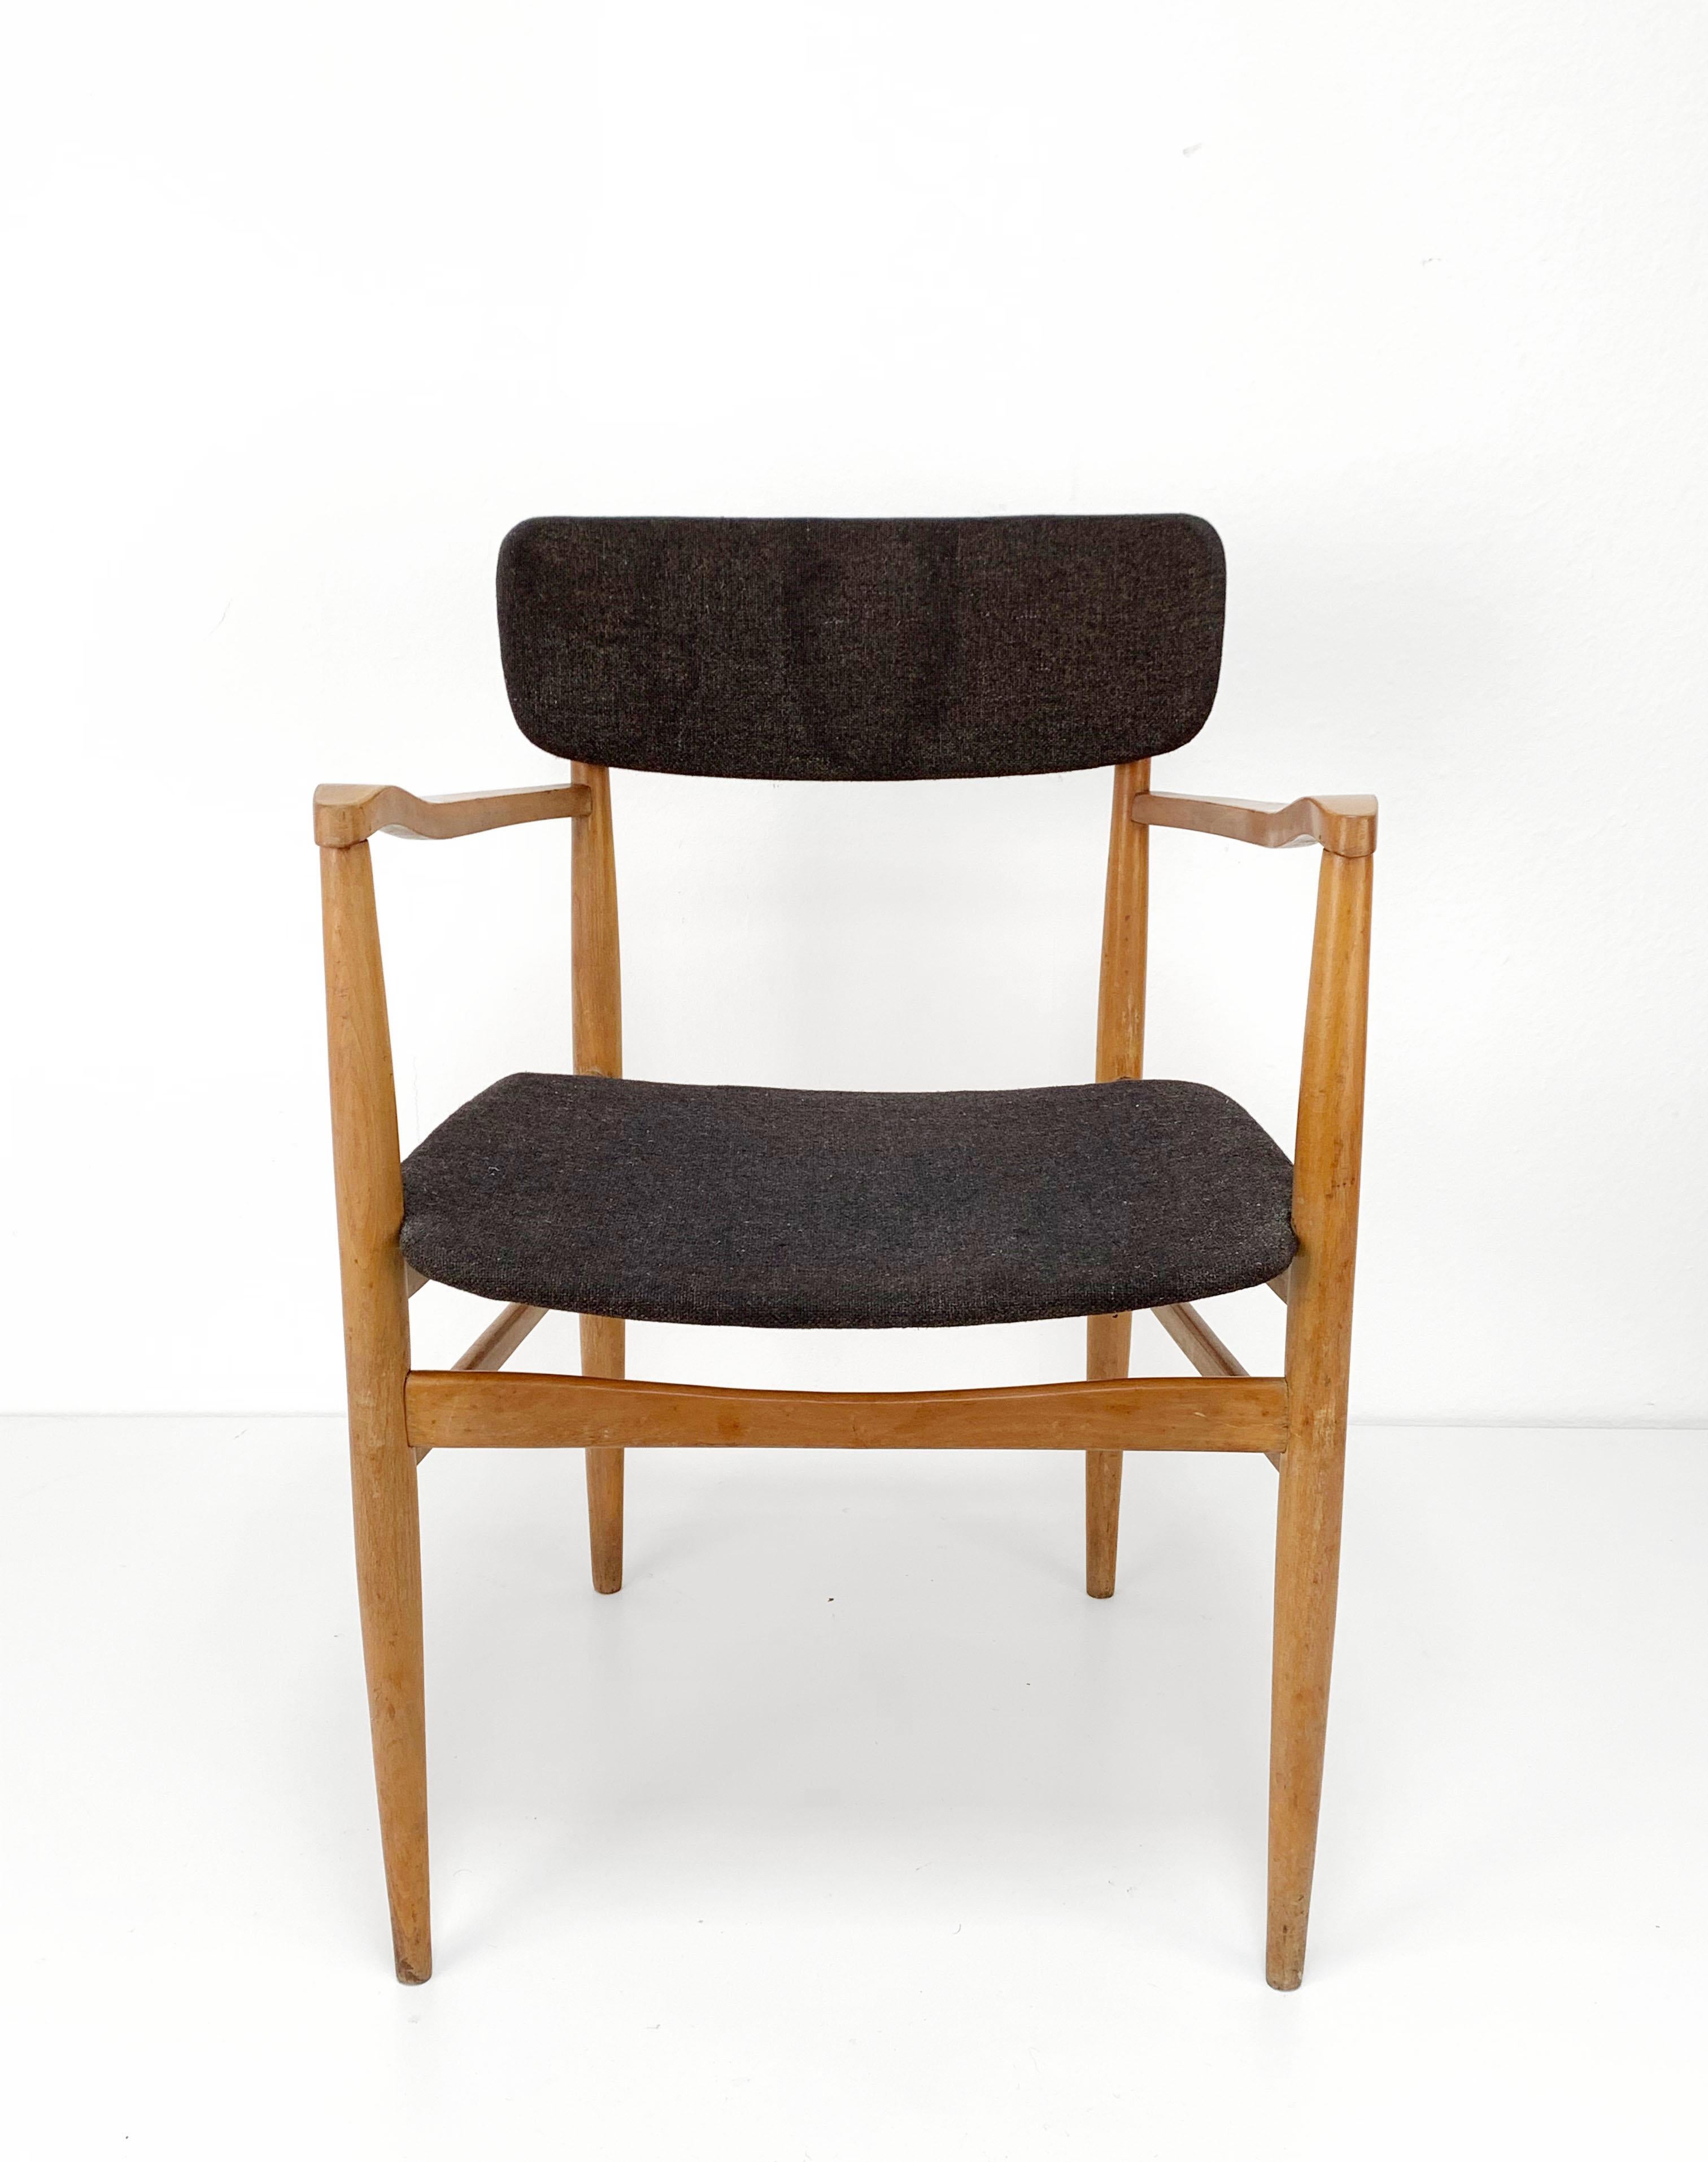 A comfortable chair with armrests and a beautifully curved back, in the style of Finn Juhl. The chair is made of light wood with fabric covering. The chair is in good vintage condition and would be perfect to use in combination with a desk.